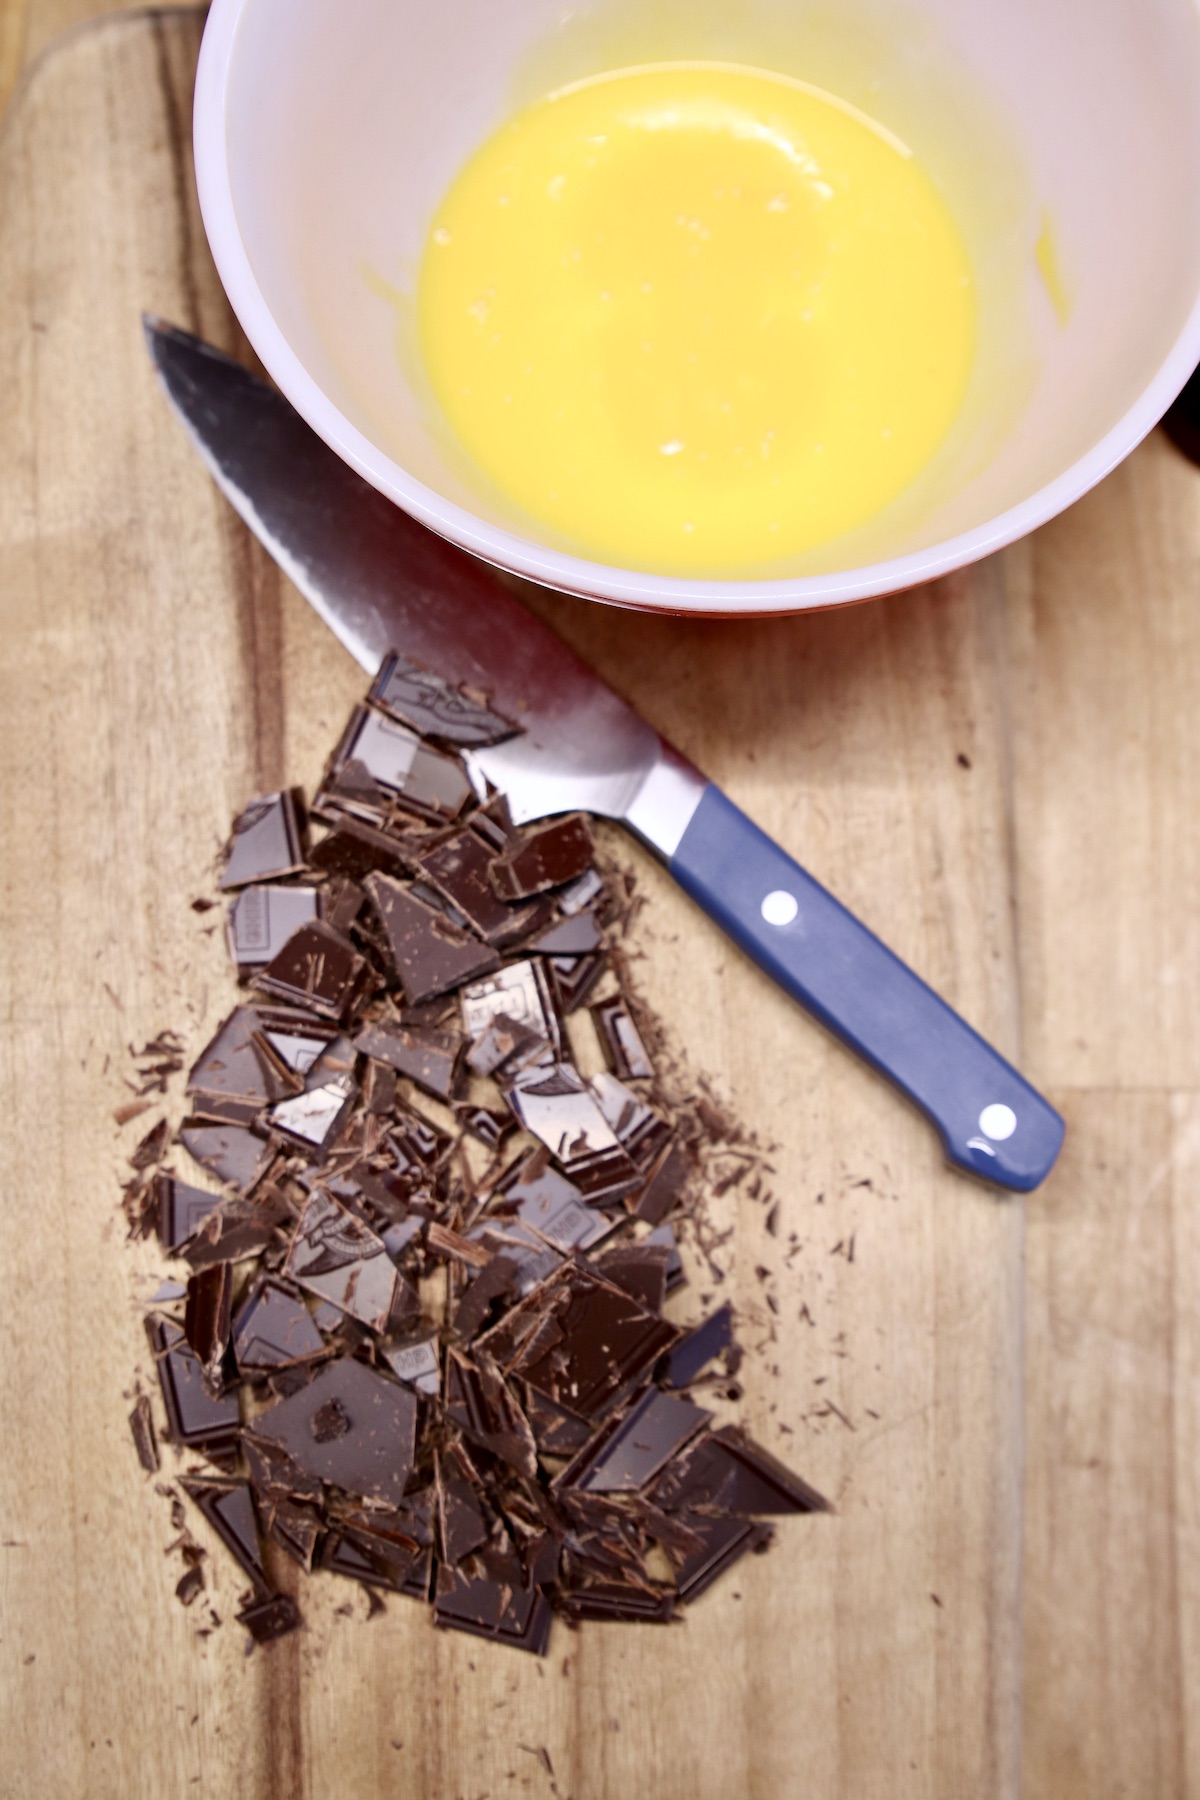 bowl of egg yolks, chopped chocolate with knife